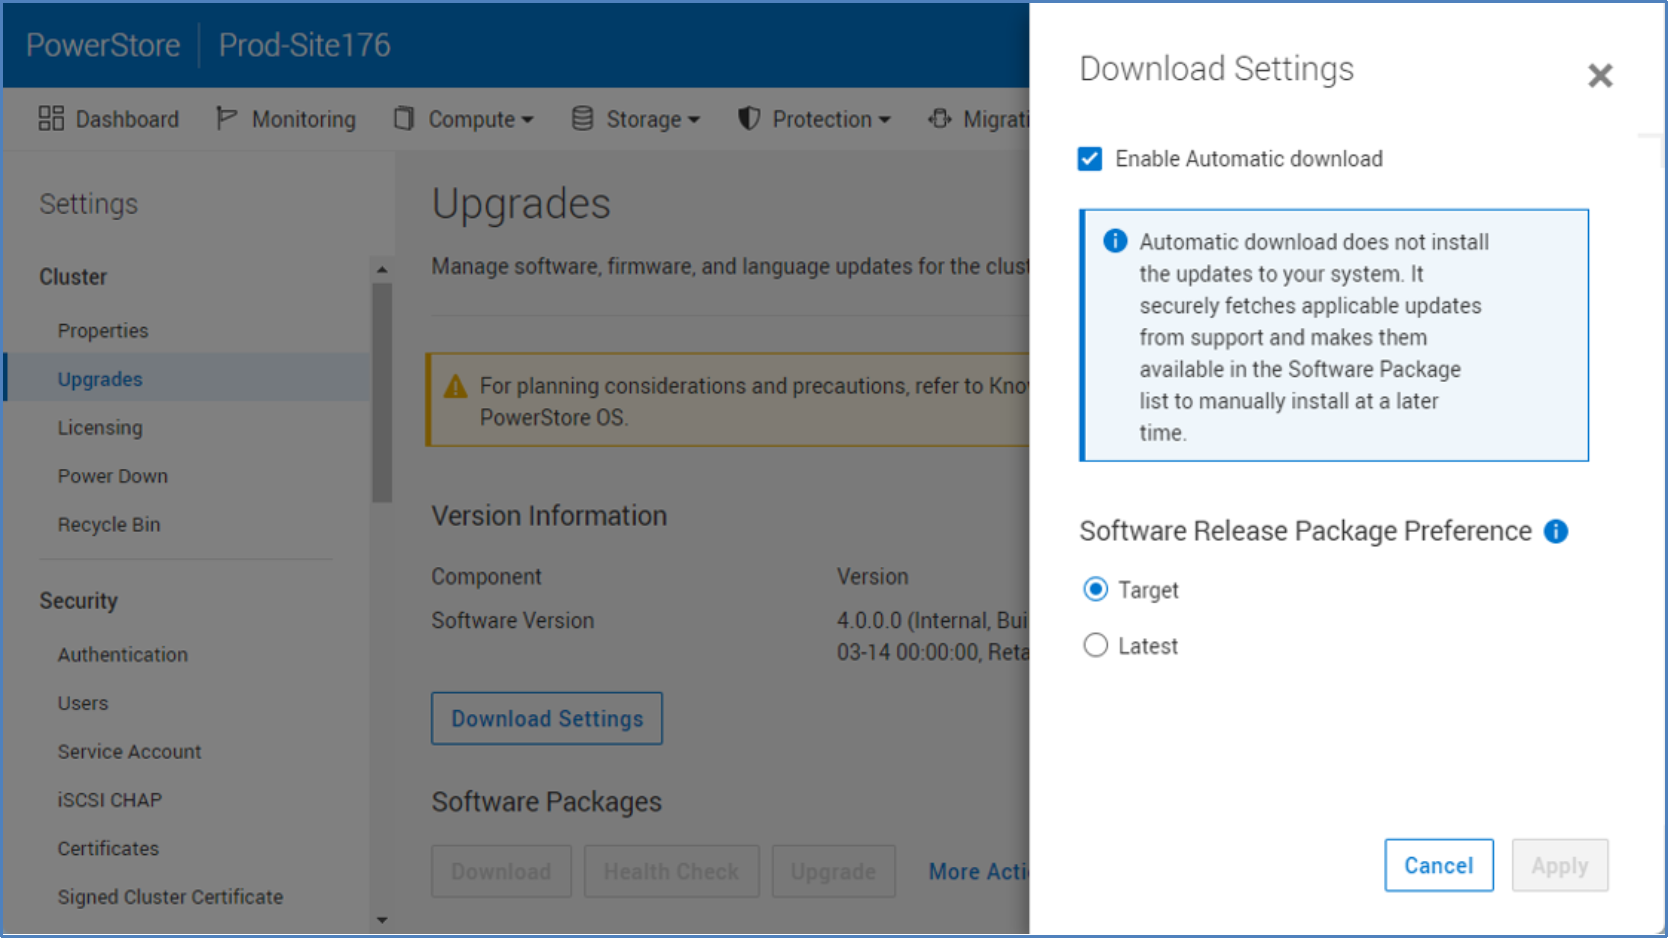 New download settings slide-out in PowerStore Manager UI allowing users to select their software release package preference of latest or target code.